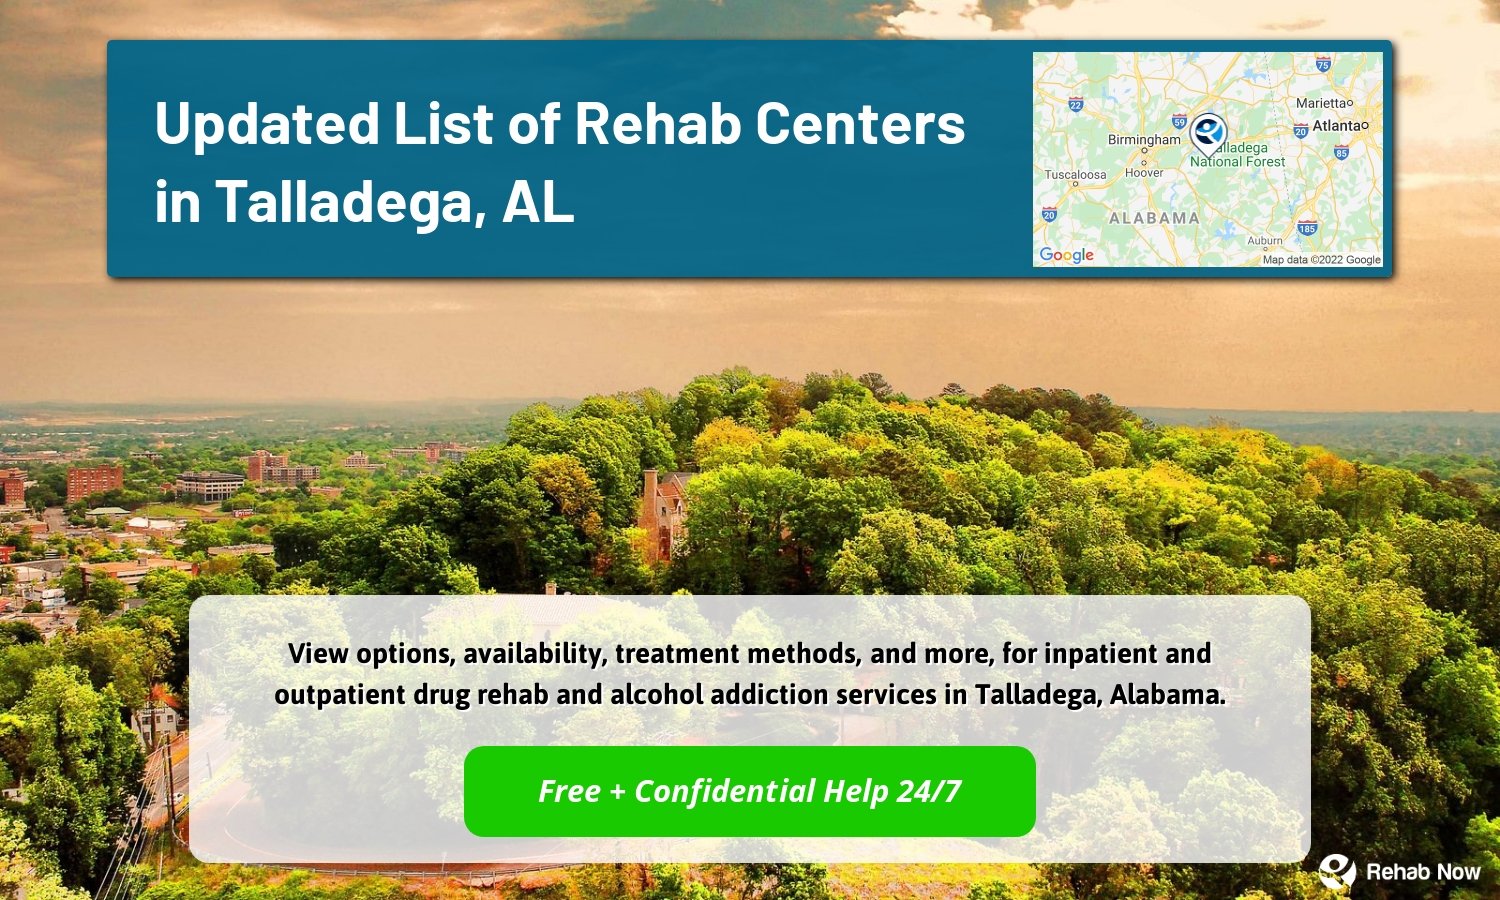 View options, availability, treatment methods, and more, for inpatient and outpatient drug rehab and alcohol addiction services in Talladega, Alabama.